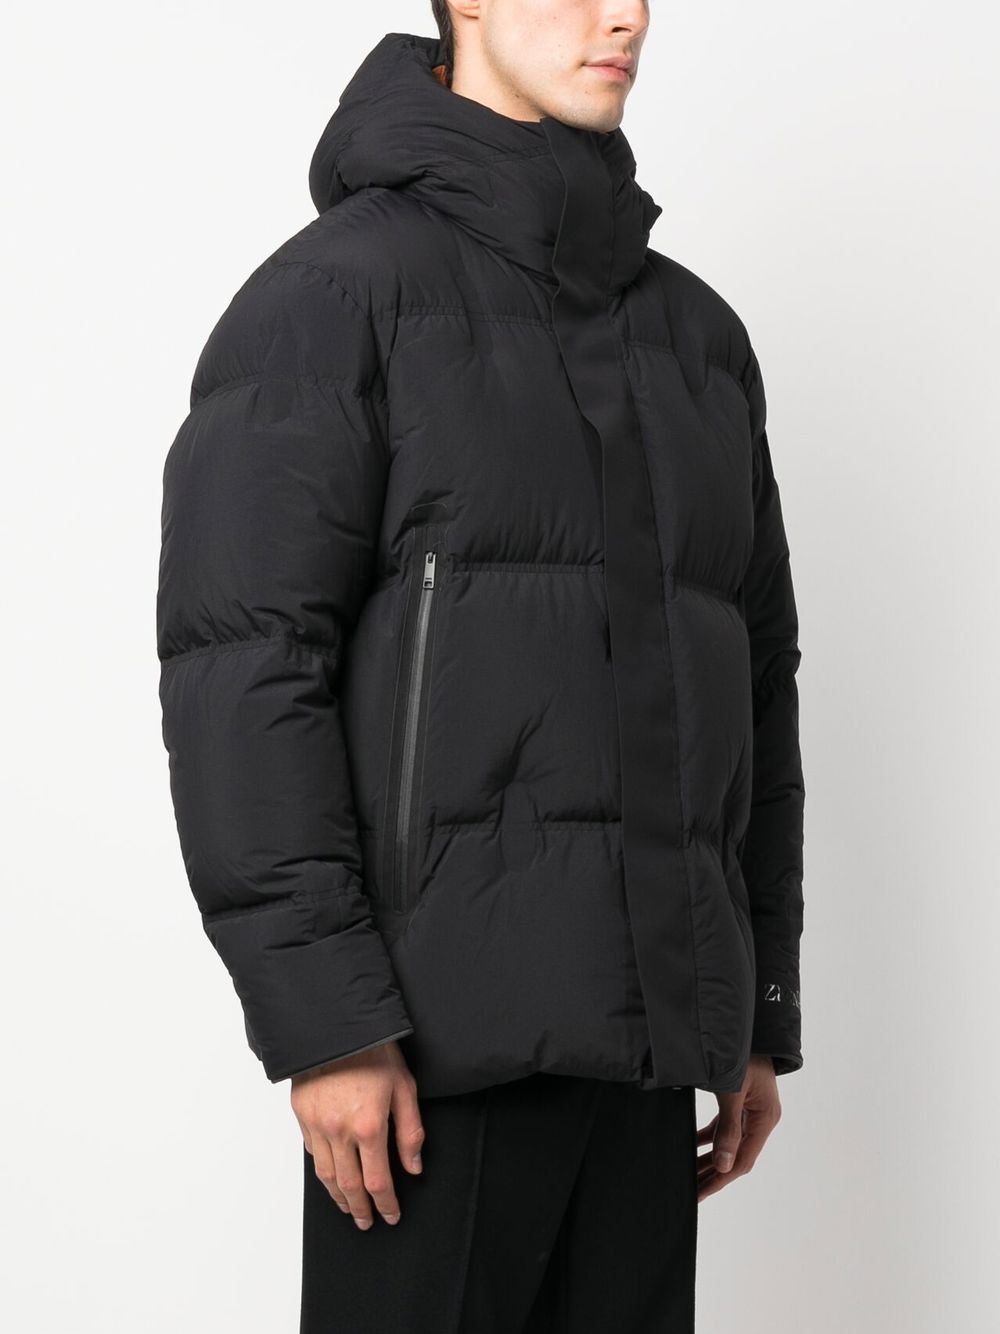 Zegna Quilted Puffer Coat - Farfetch